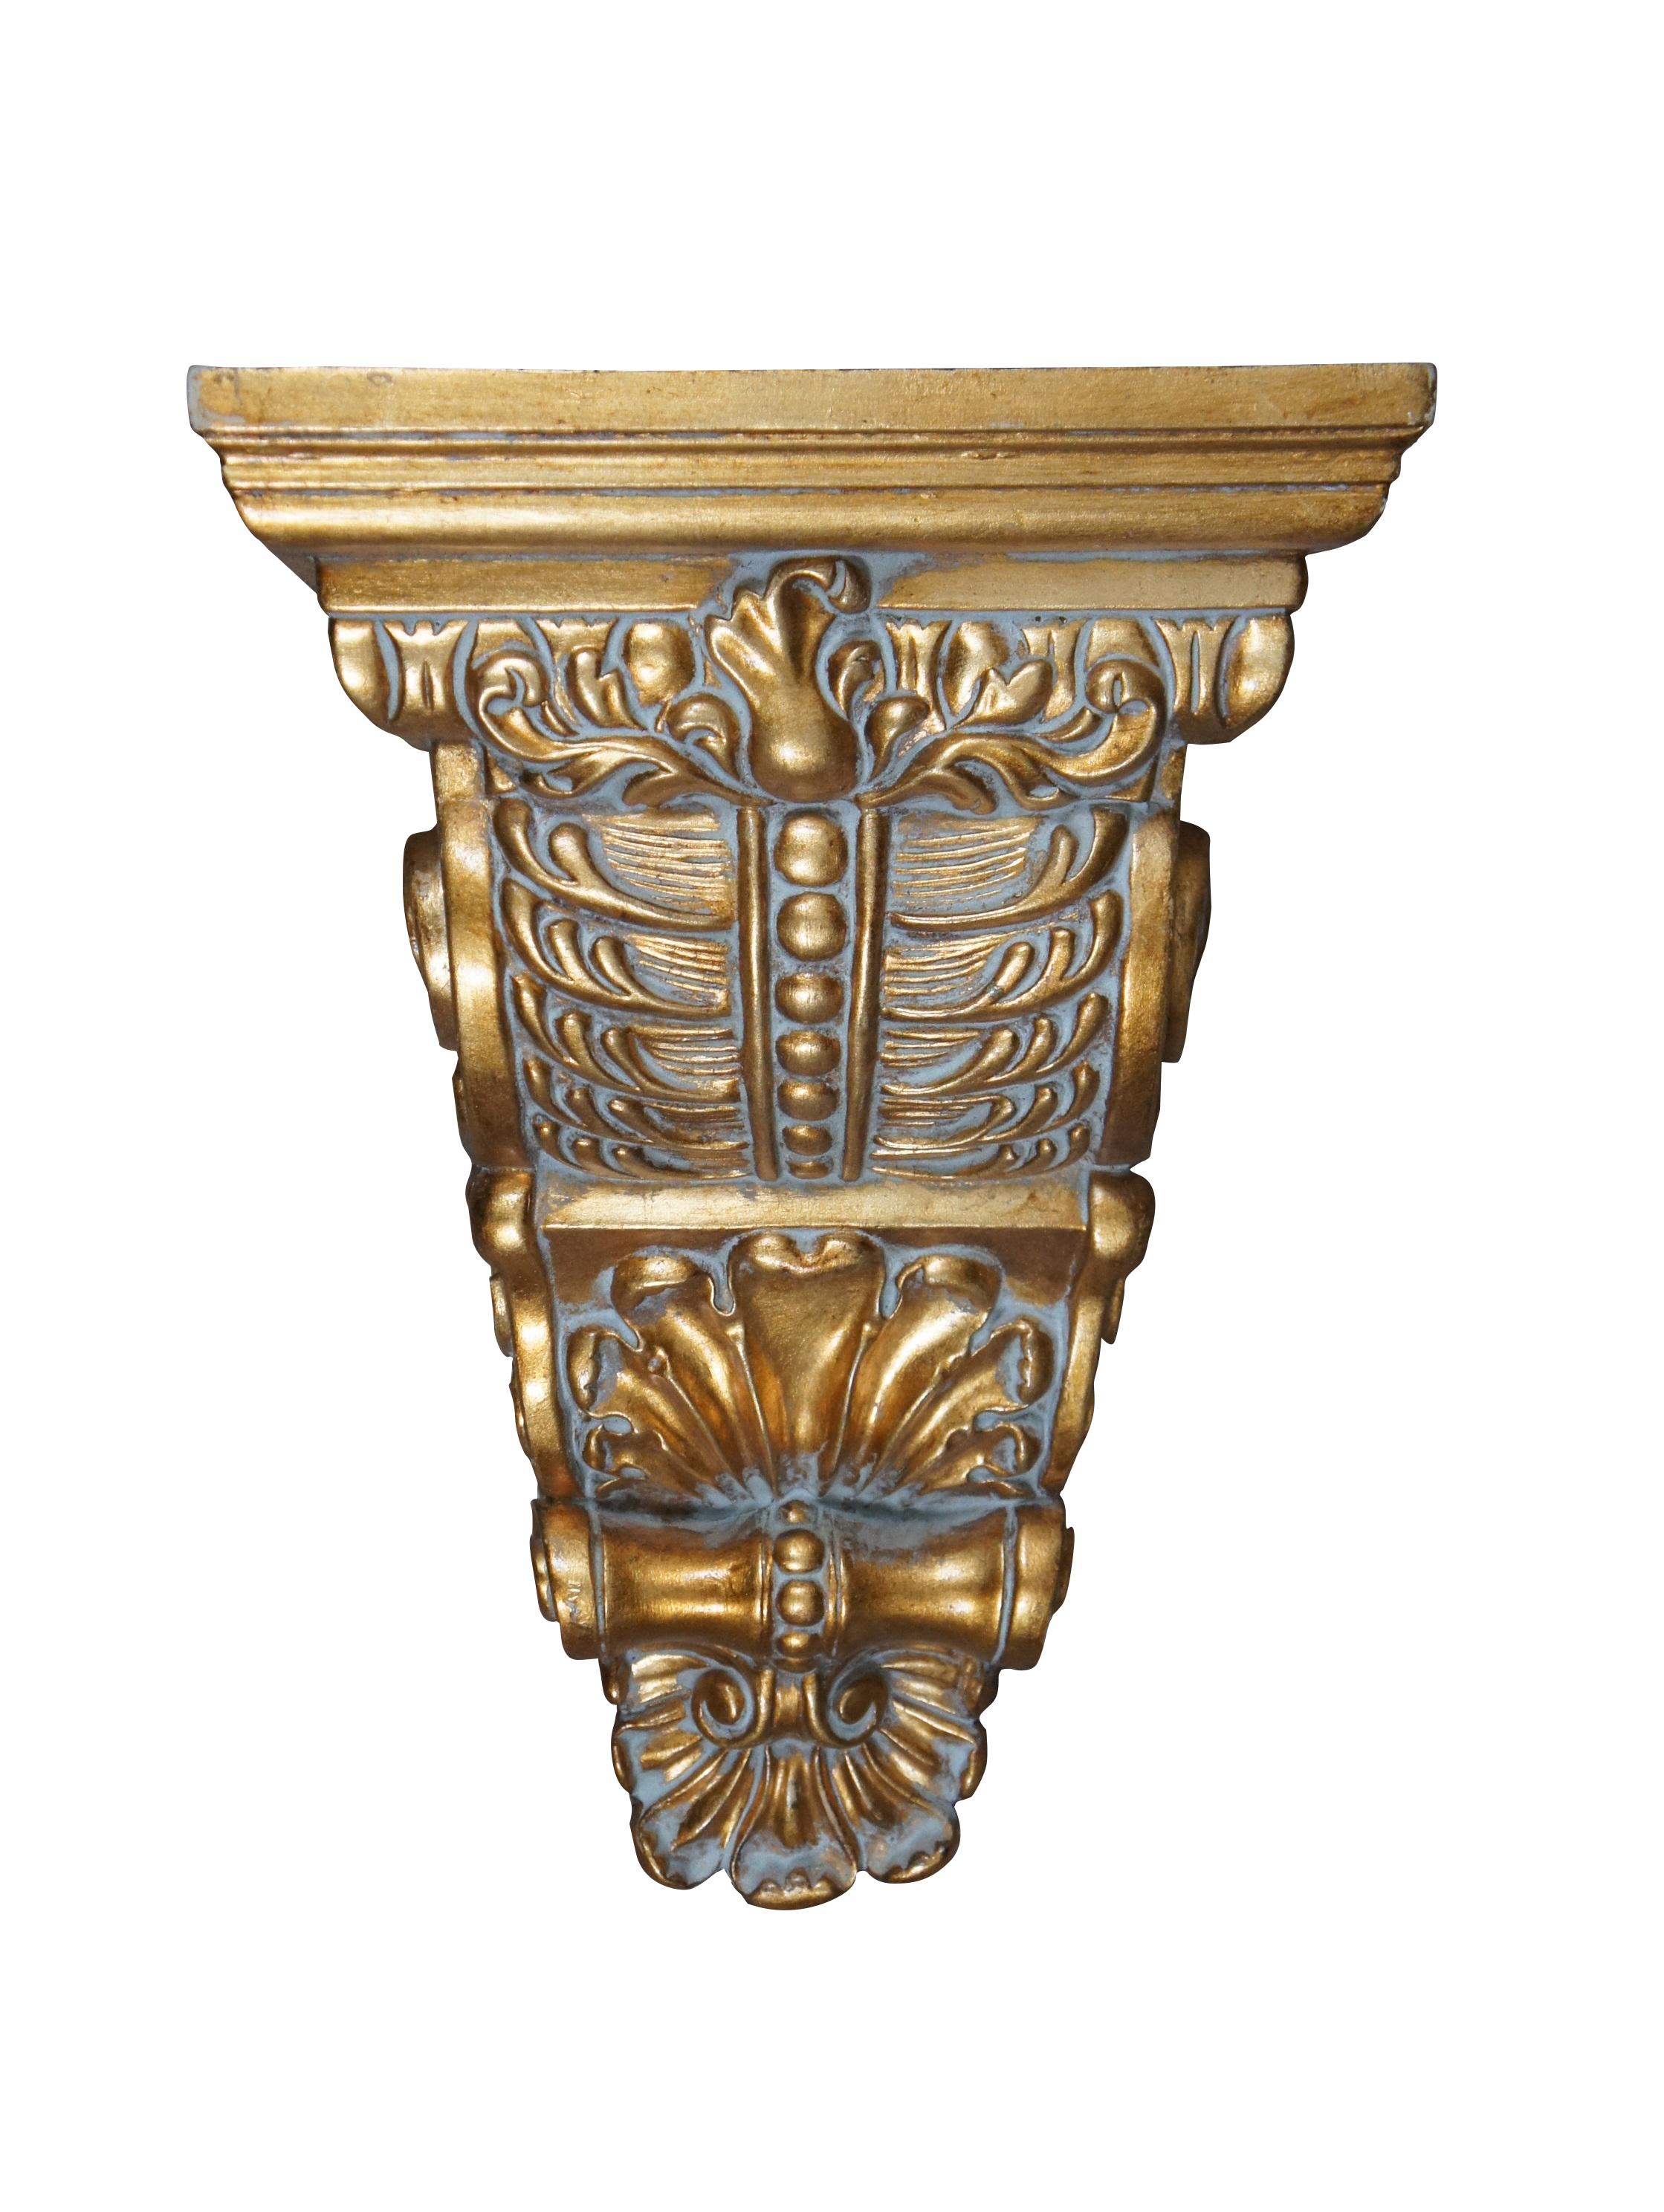 Pair of vintage 20th century gilt corbels / wall brackets / shelves with a French inspired design of scallops, foliates, and scrollwork. Rectangular top. Composite foam with inset picture hooks.

Dimensions:
11